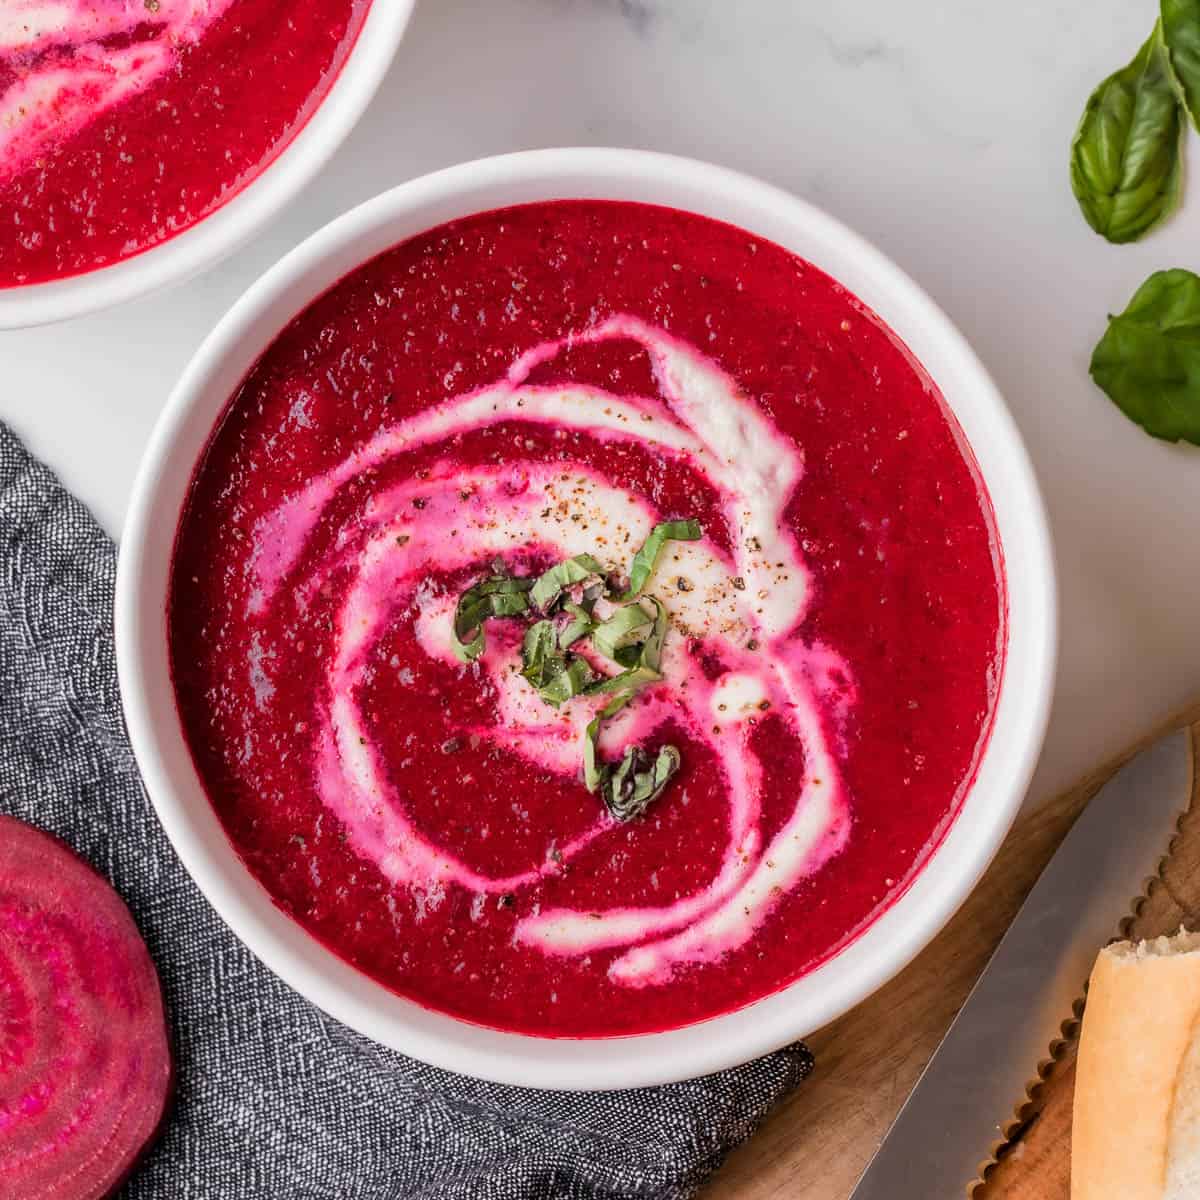 https://selfproclaimedfoodie.com/wp-content/uploads/fresh-beet-soup-featured.jpg